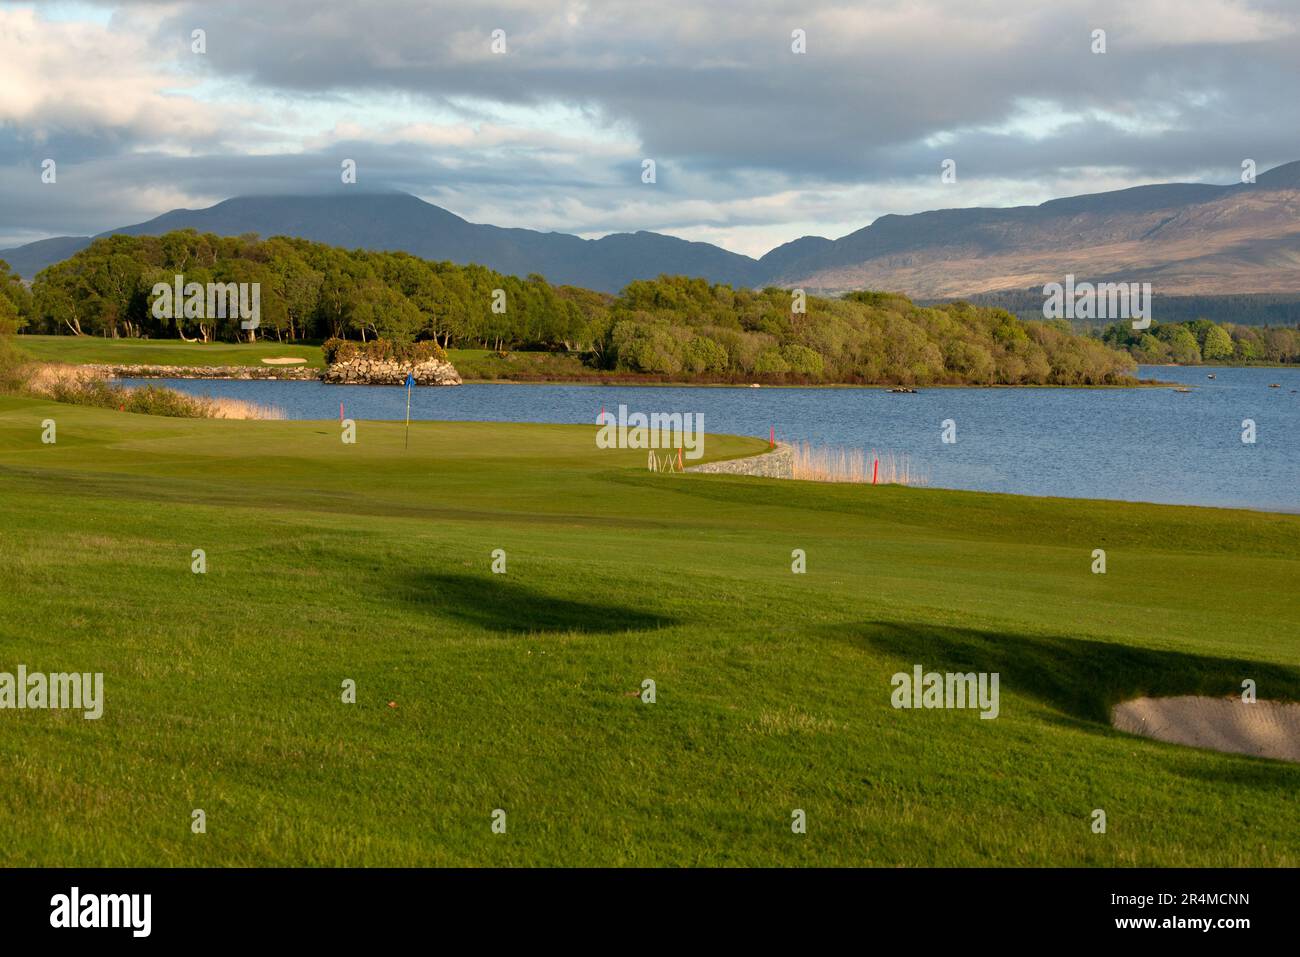 Golf course with picturesque scenery at the Fossa Golf and Fishing Club, Killarney National Park, County Kerry, Ireland Stock Photo